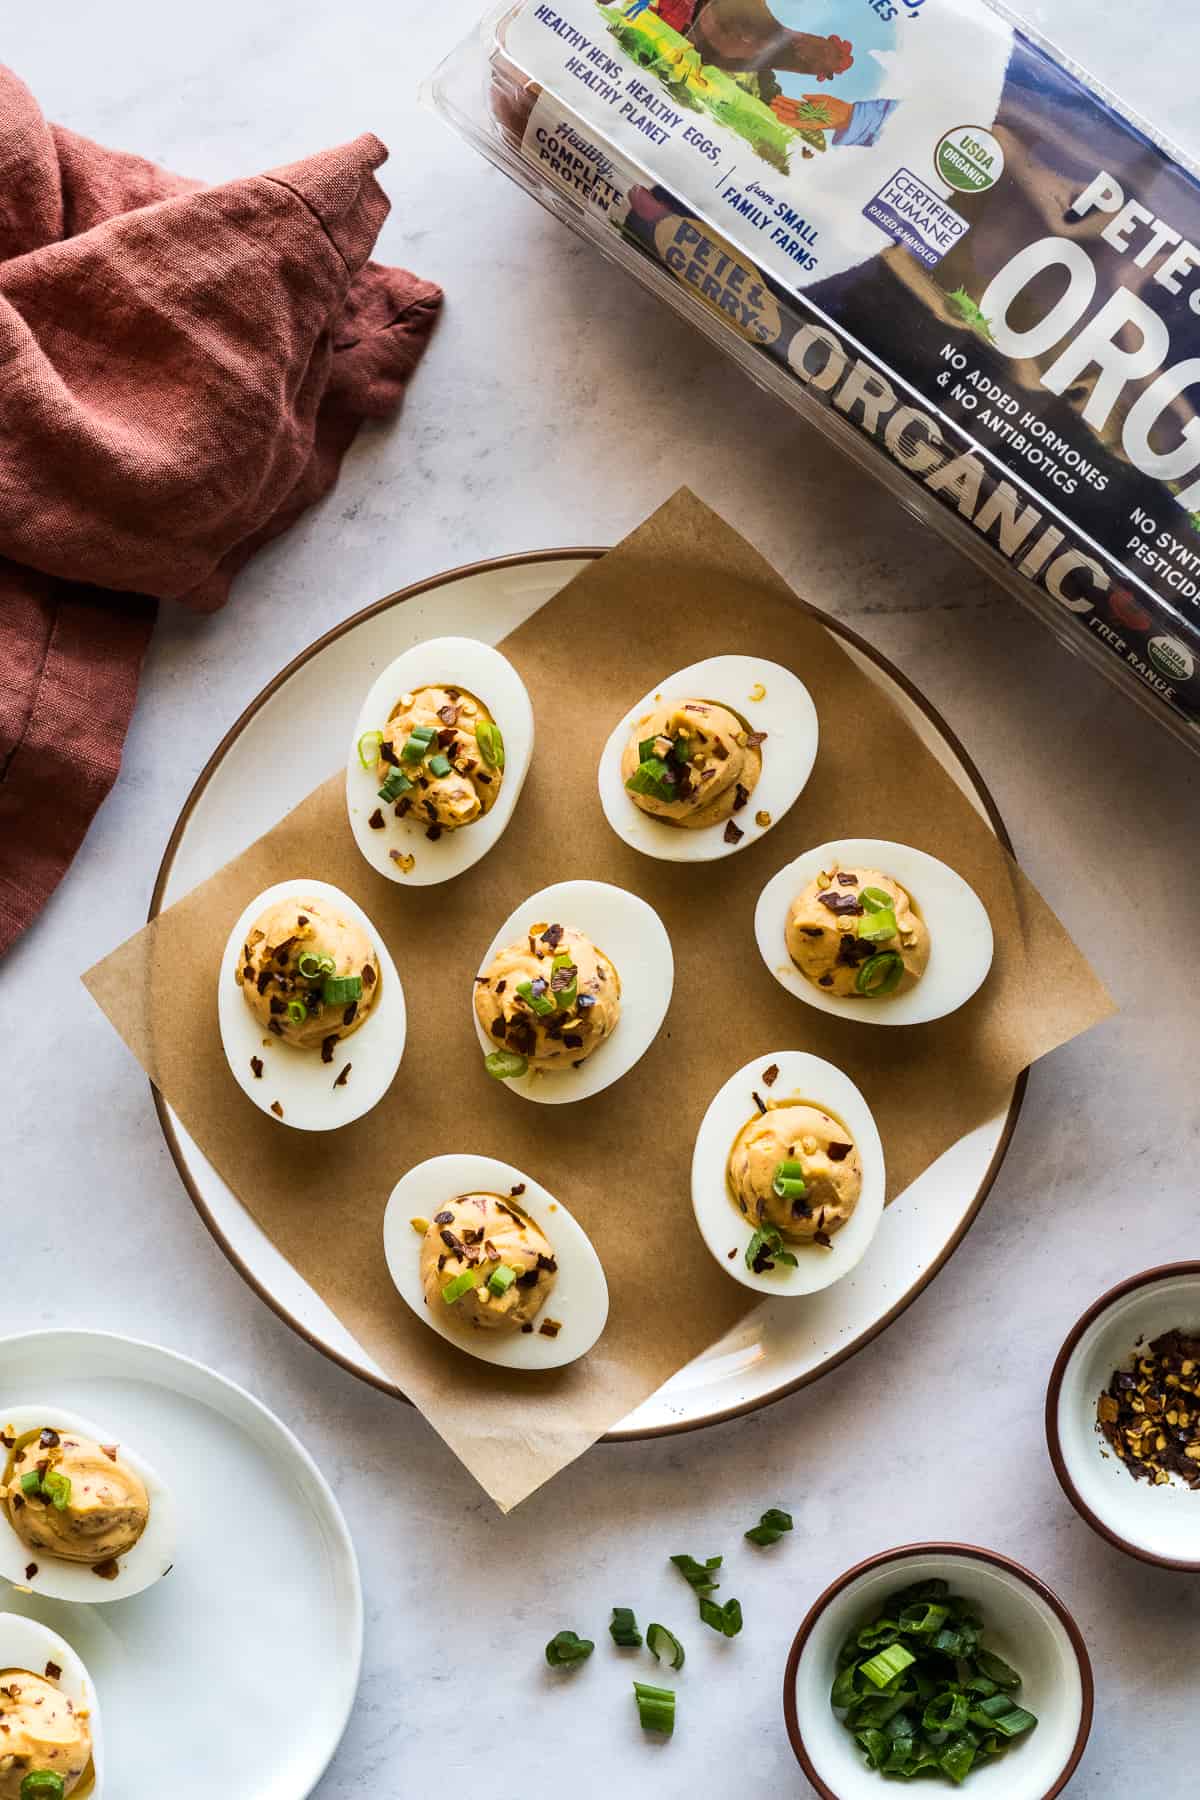 Spicy deviled eggs garnished with green onions and crushed red pepper flakes.